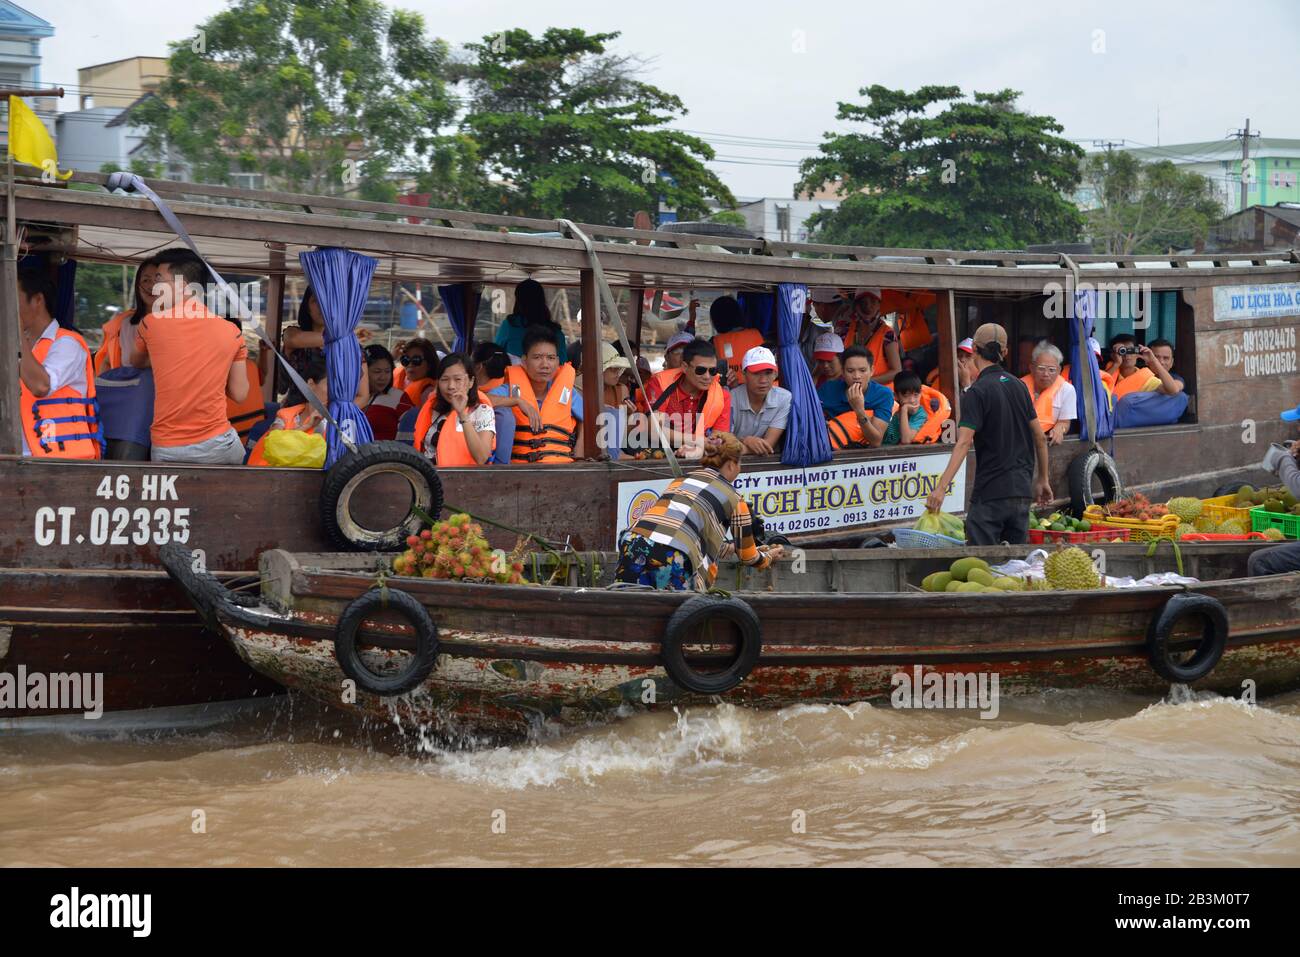 Schwimmender Markt 'Cai Rang', Song Can Tho, Can Tho, Vietnam Stockfoto